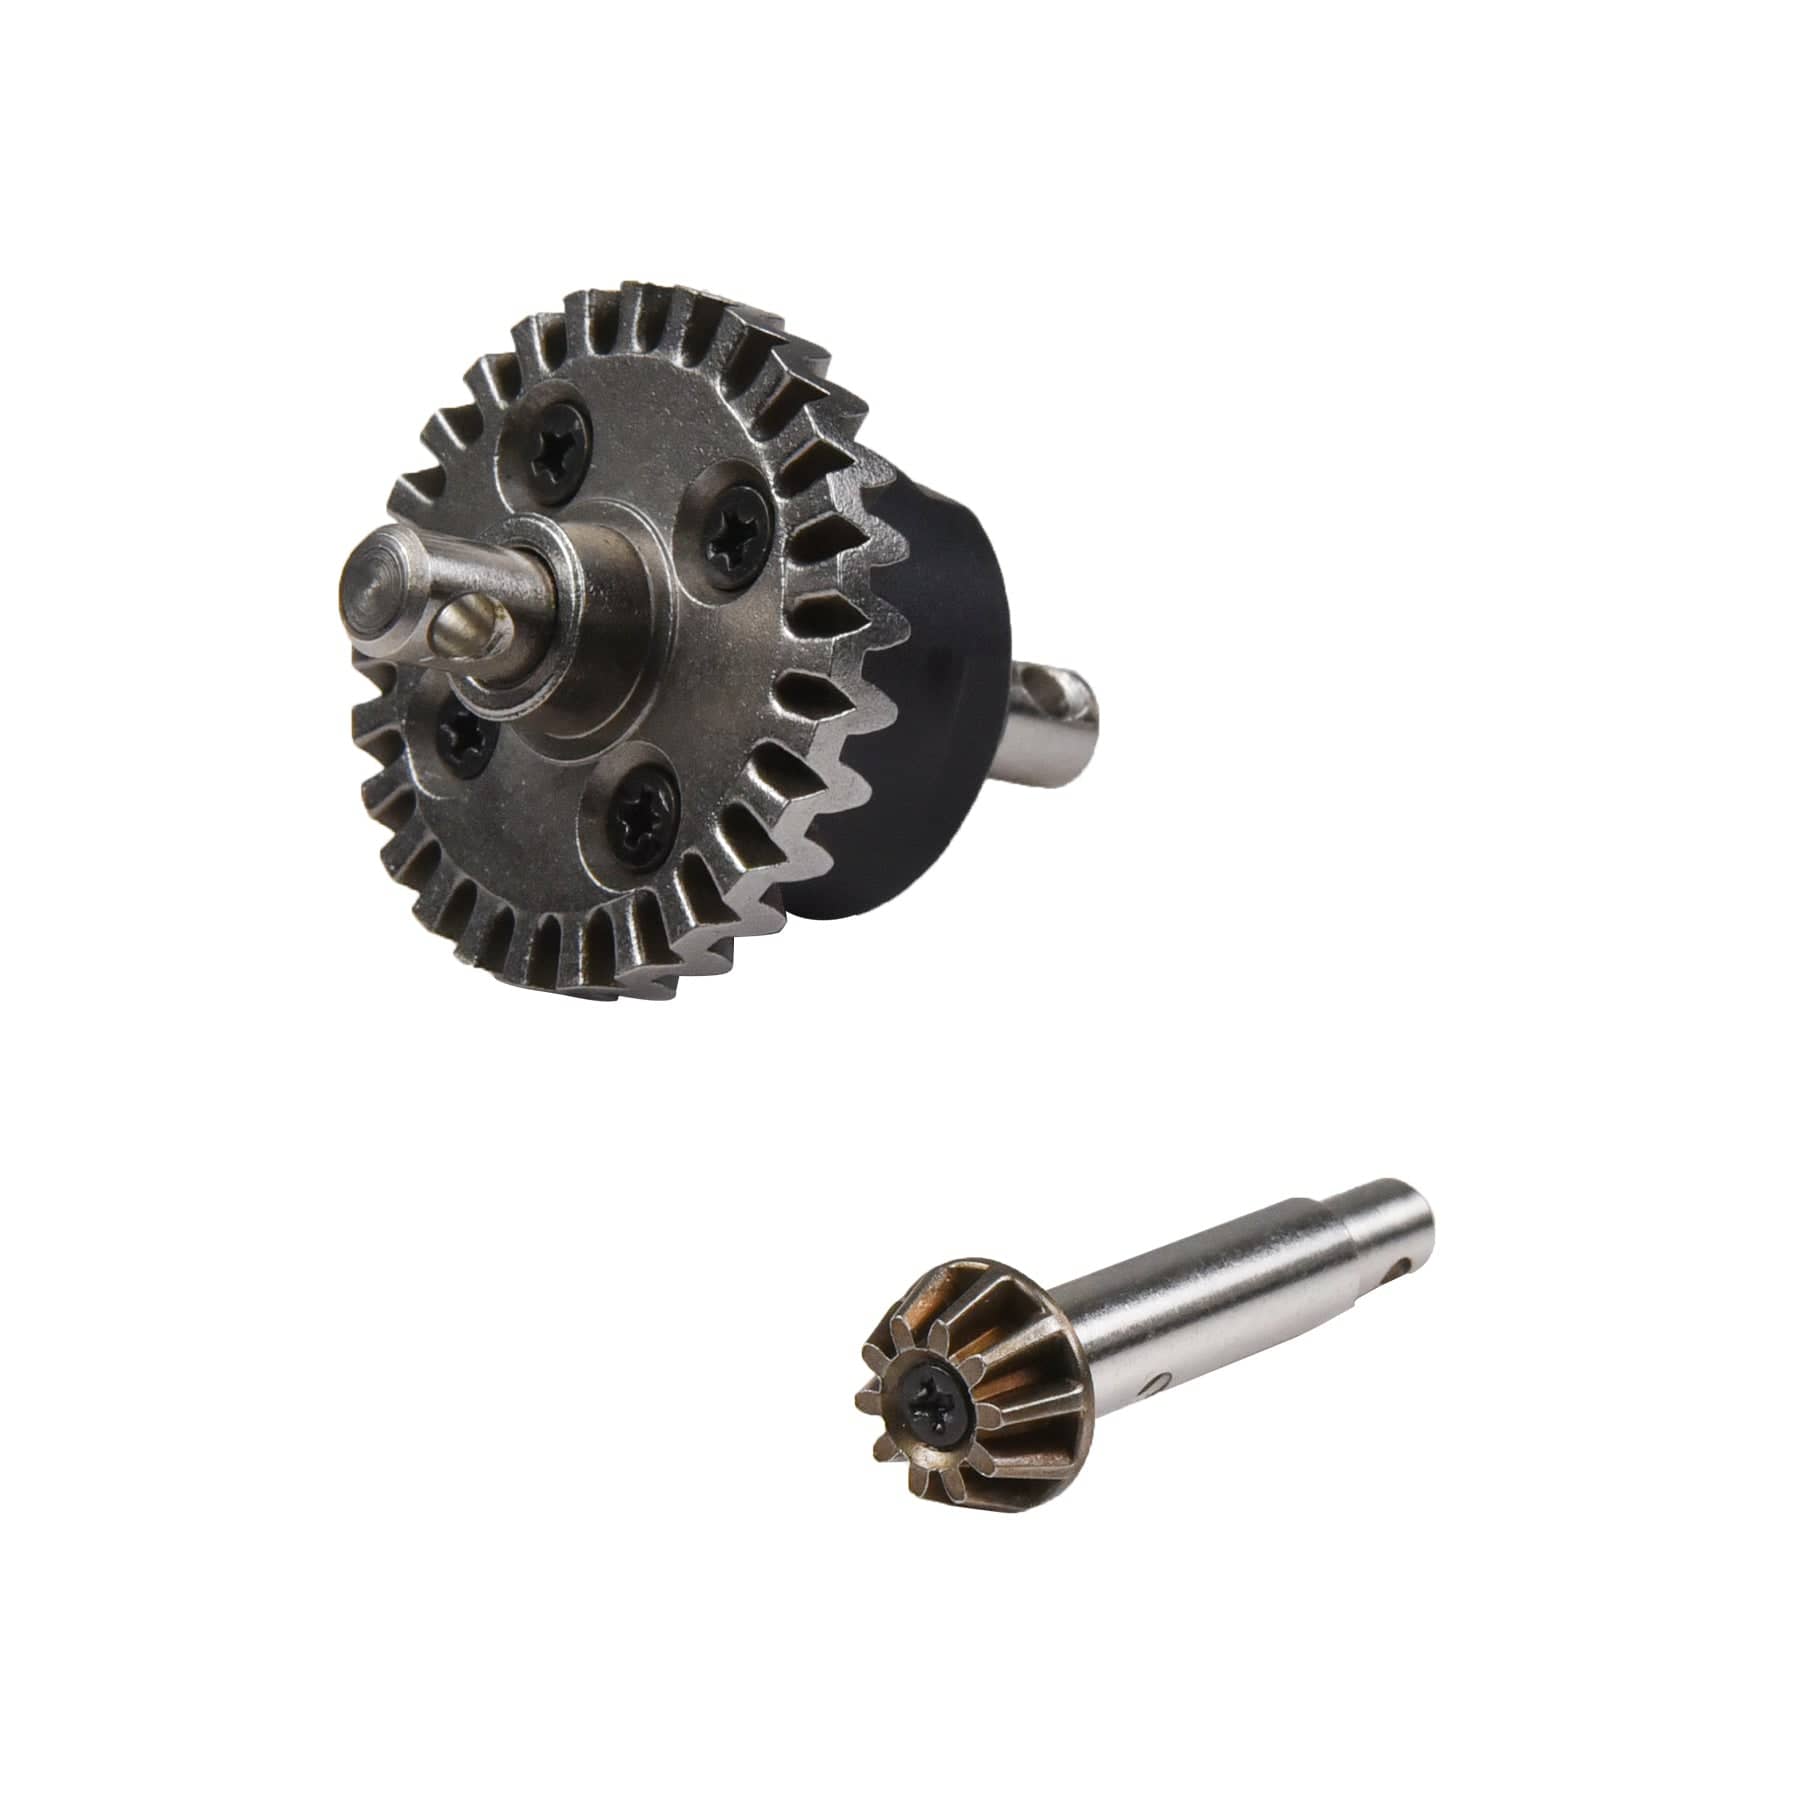 HOSIM RC Car Rear Differential Mechanism Components 1:10 Scale FY-QS03 for X07 X08